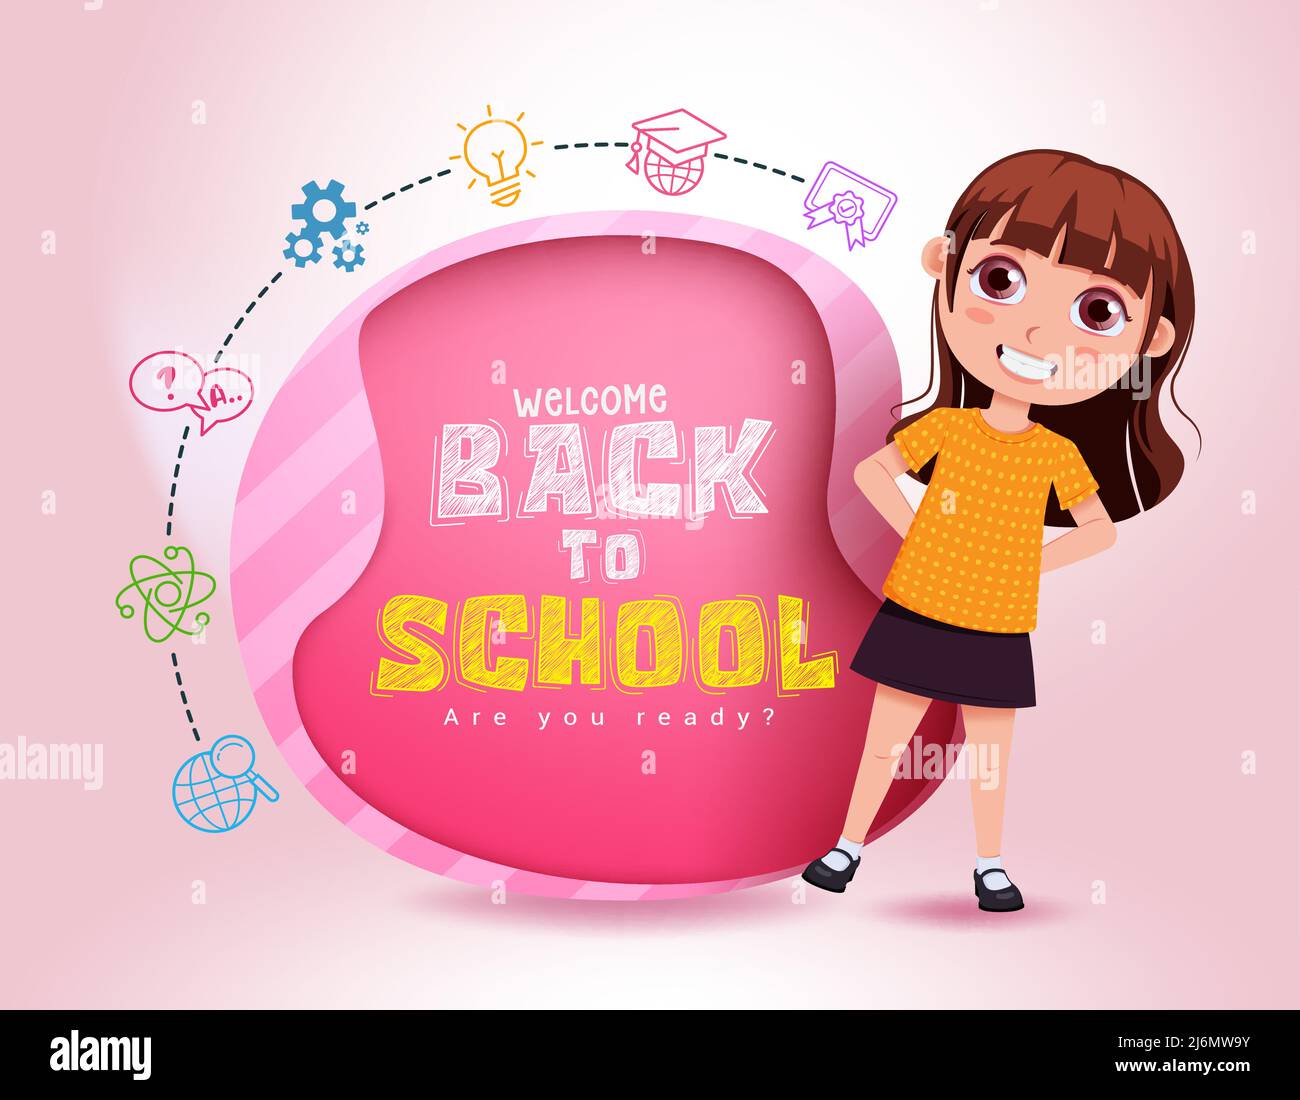 School character vector concept design. Back to school text in pink abstract with happy and friendly female kid student for educational greeting. Stock Vector